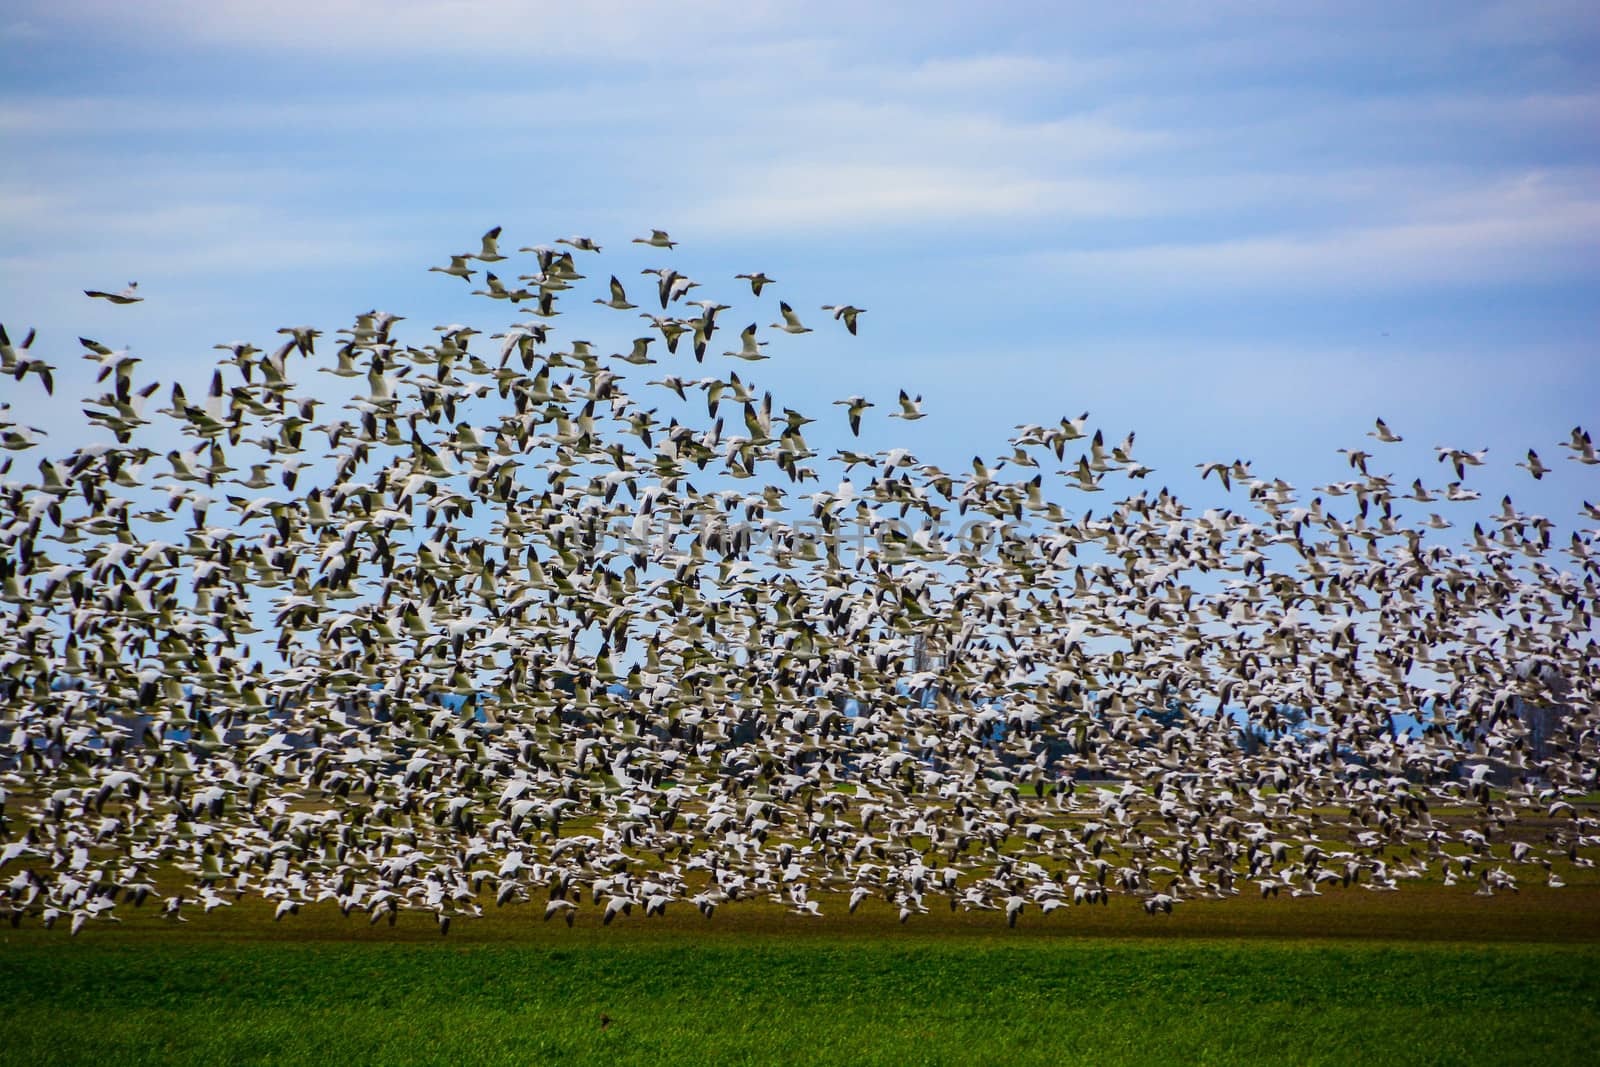 Swarms of them gather in the Skagit Valley every Winter